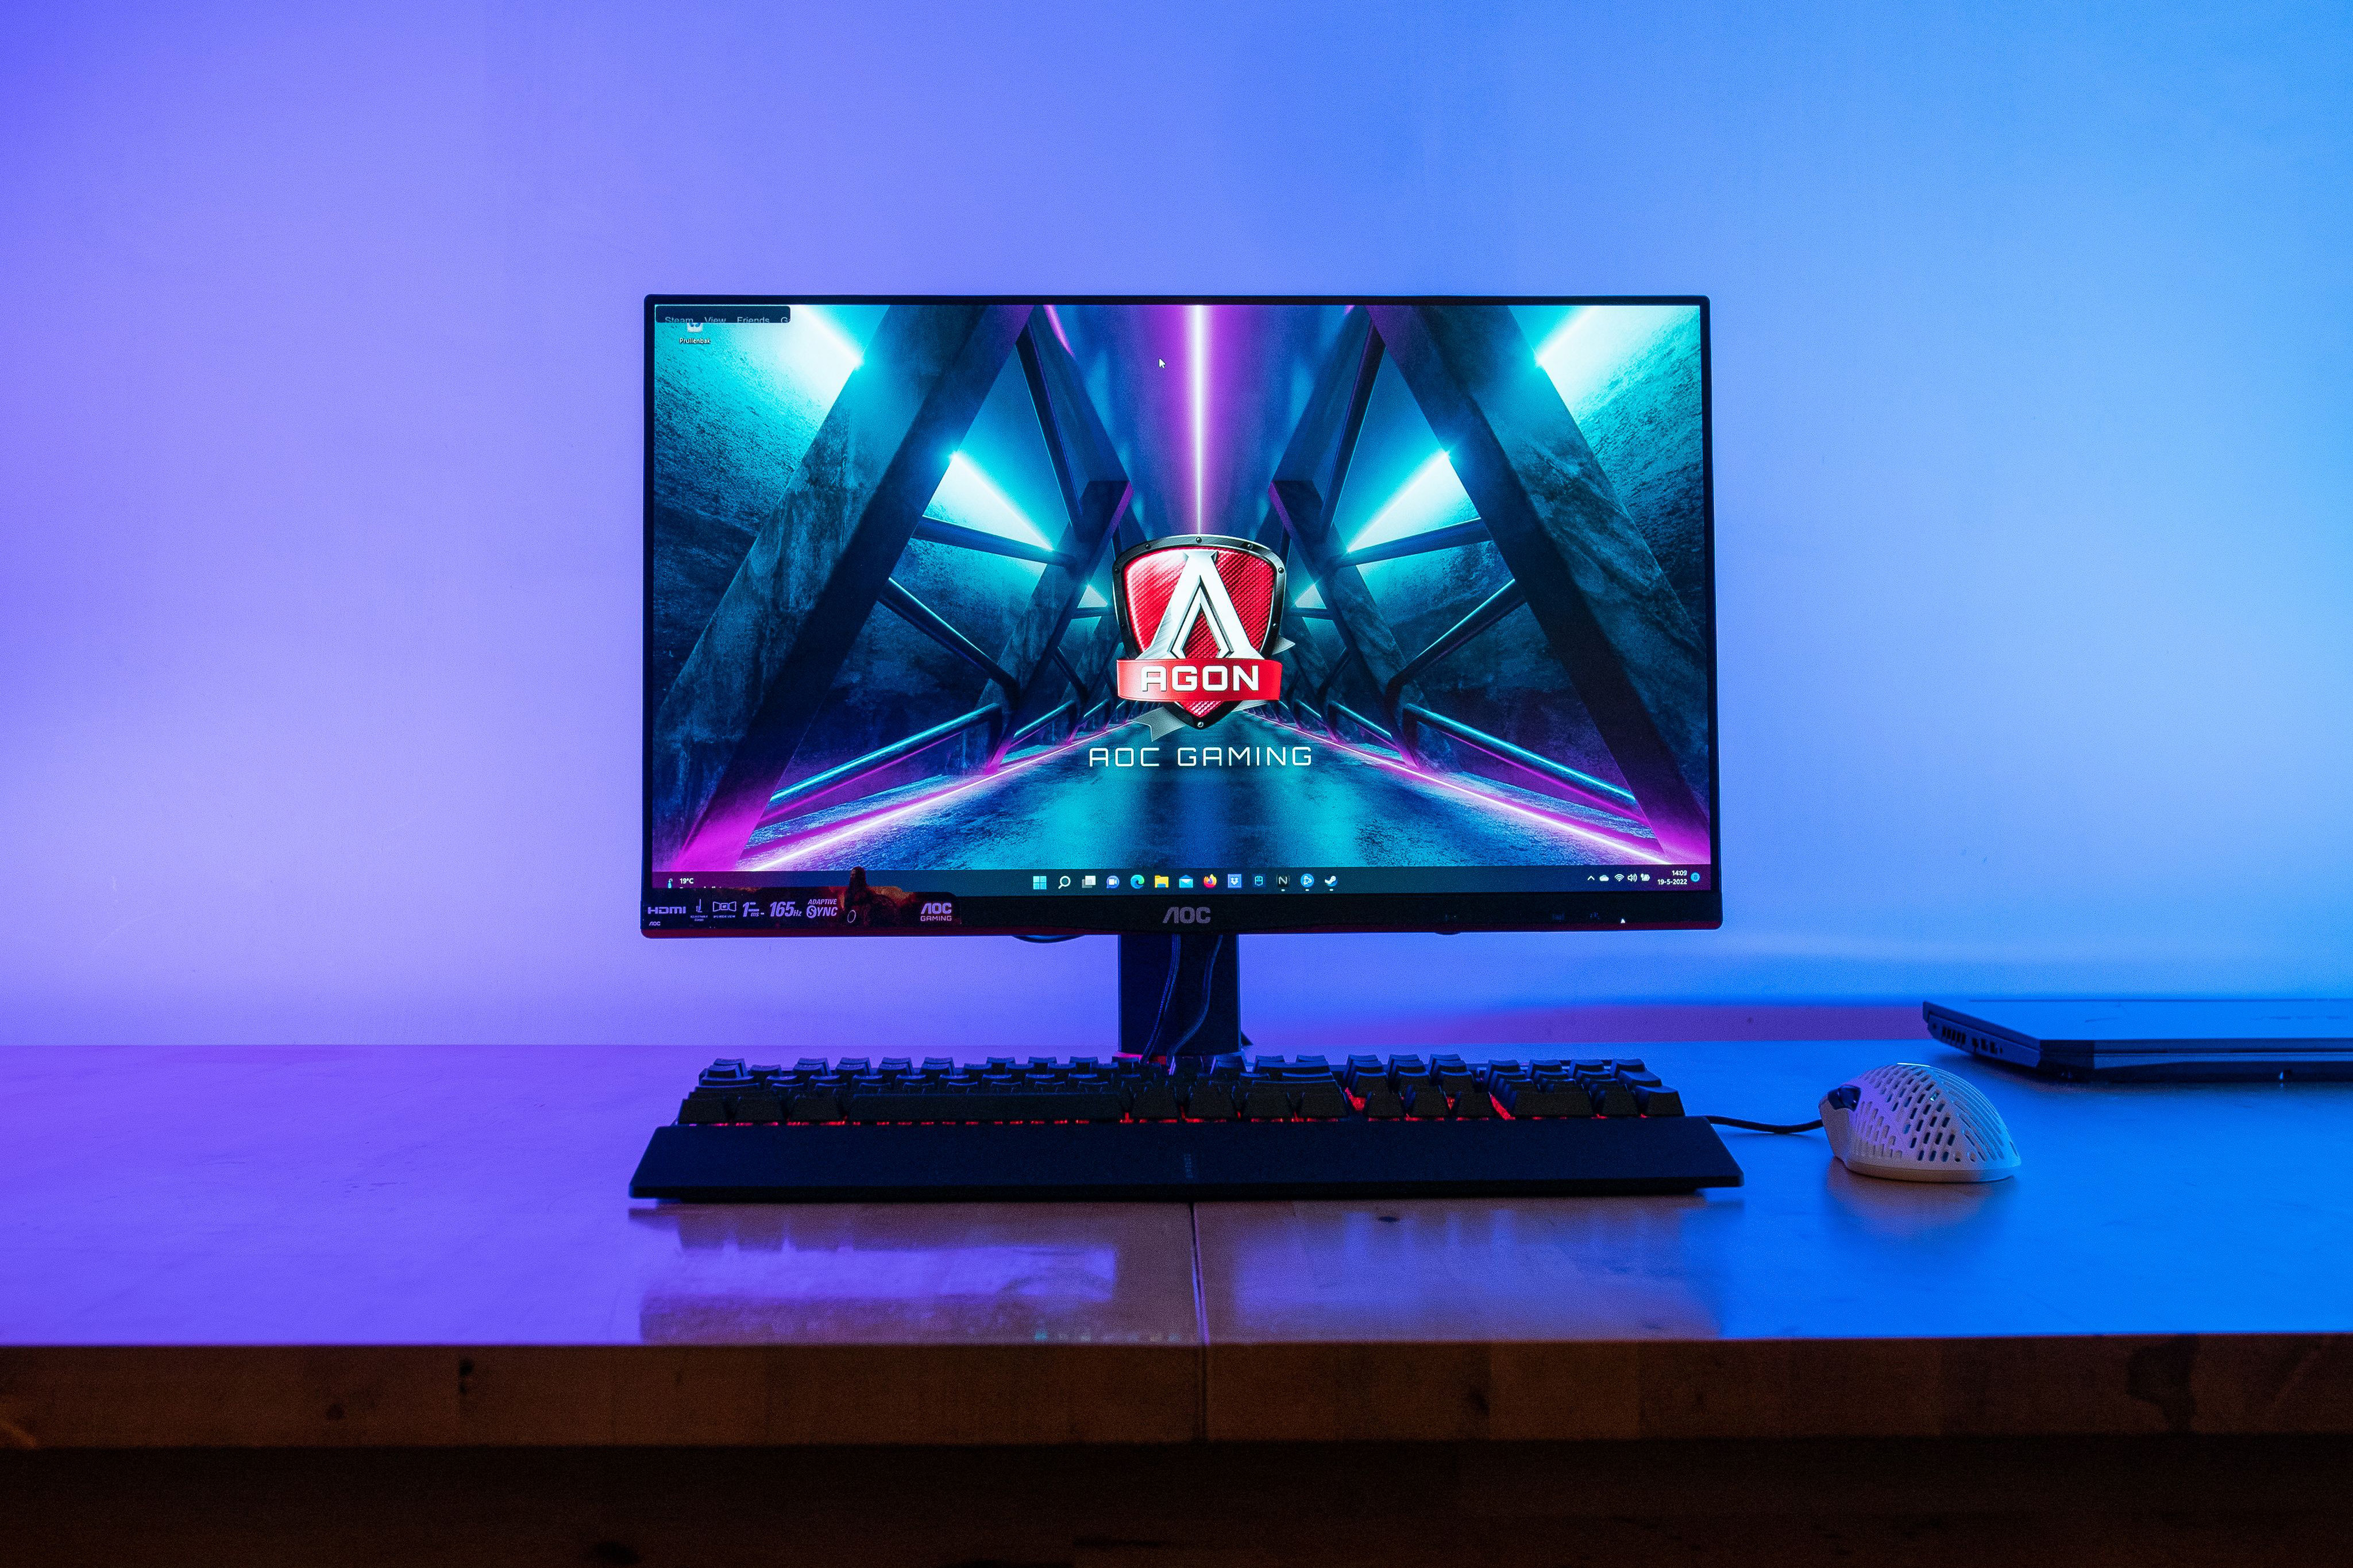 heilig Motivatie leer Agon by AOC 24G2SPU review: prima instap gaming monitor | TechFi